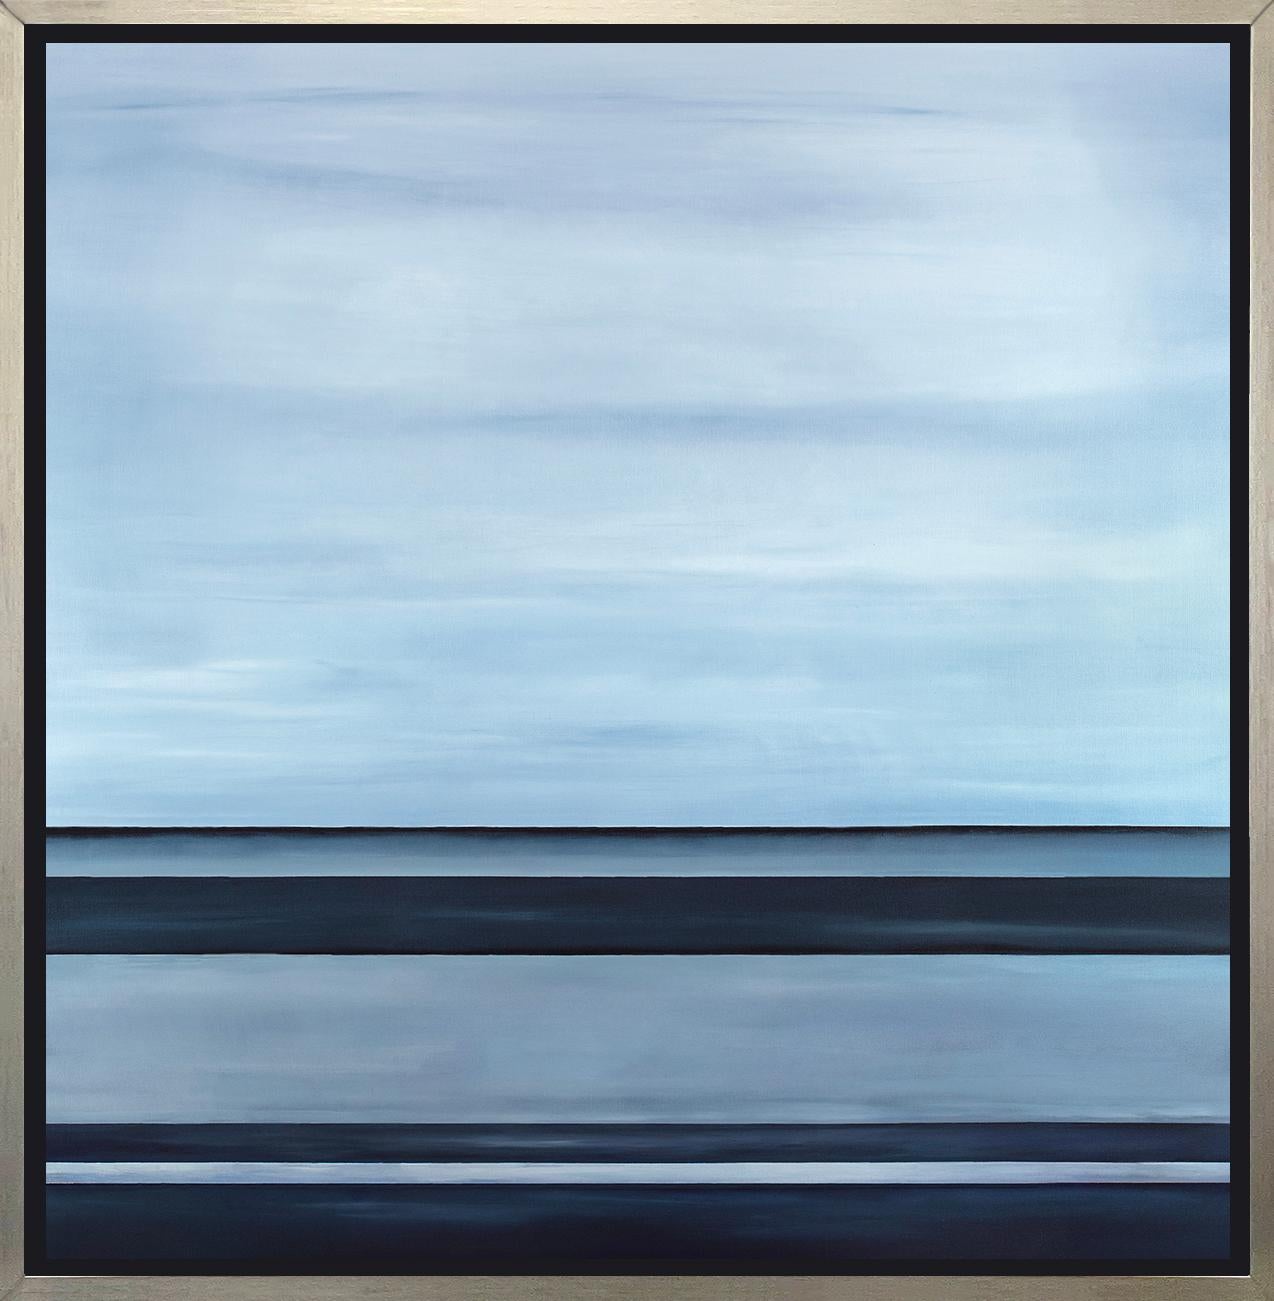 Tony Iadicicco Abstract Print - "Lost at Sea, " Framed Limited Edition Giclee Print, 40" x 40"